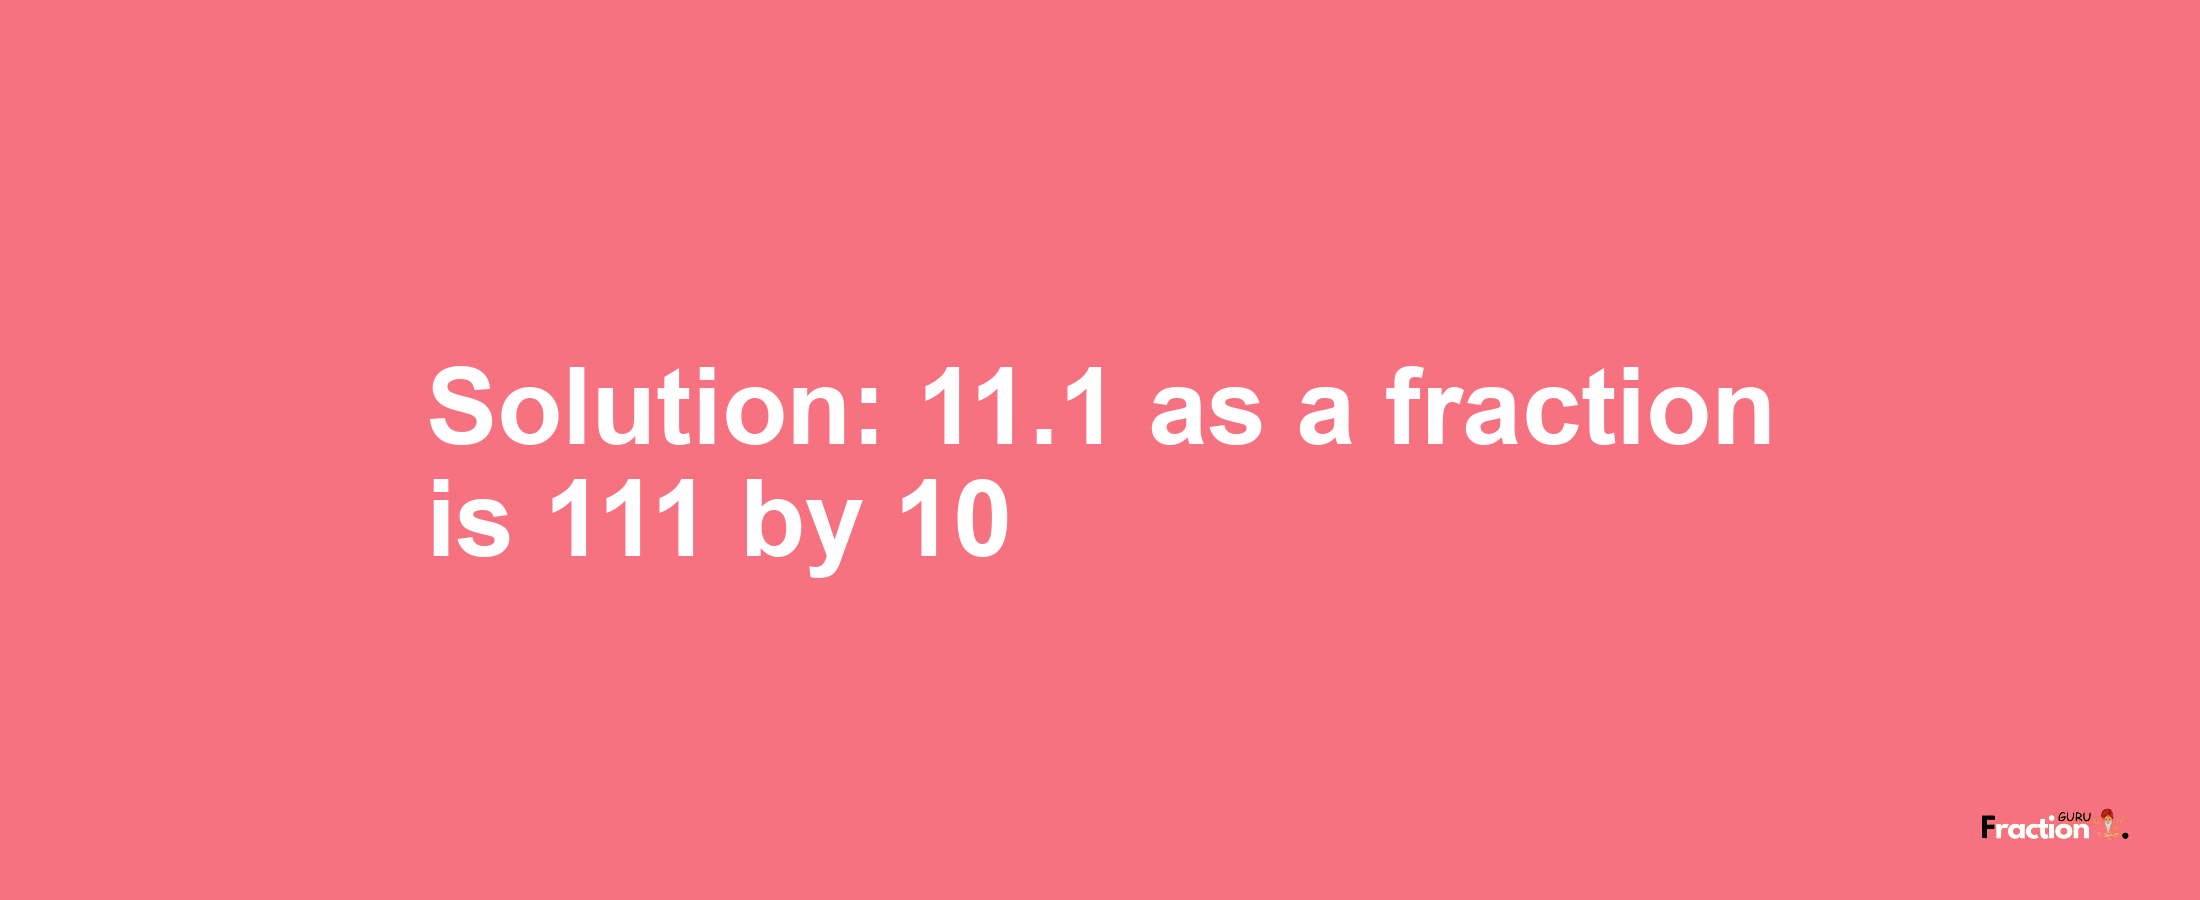 Solution:11.1 as a fraction is 111/10